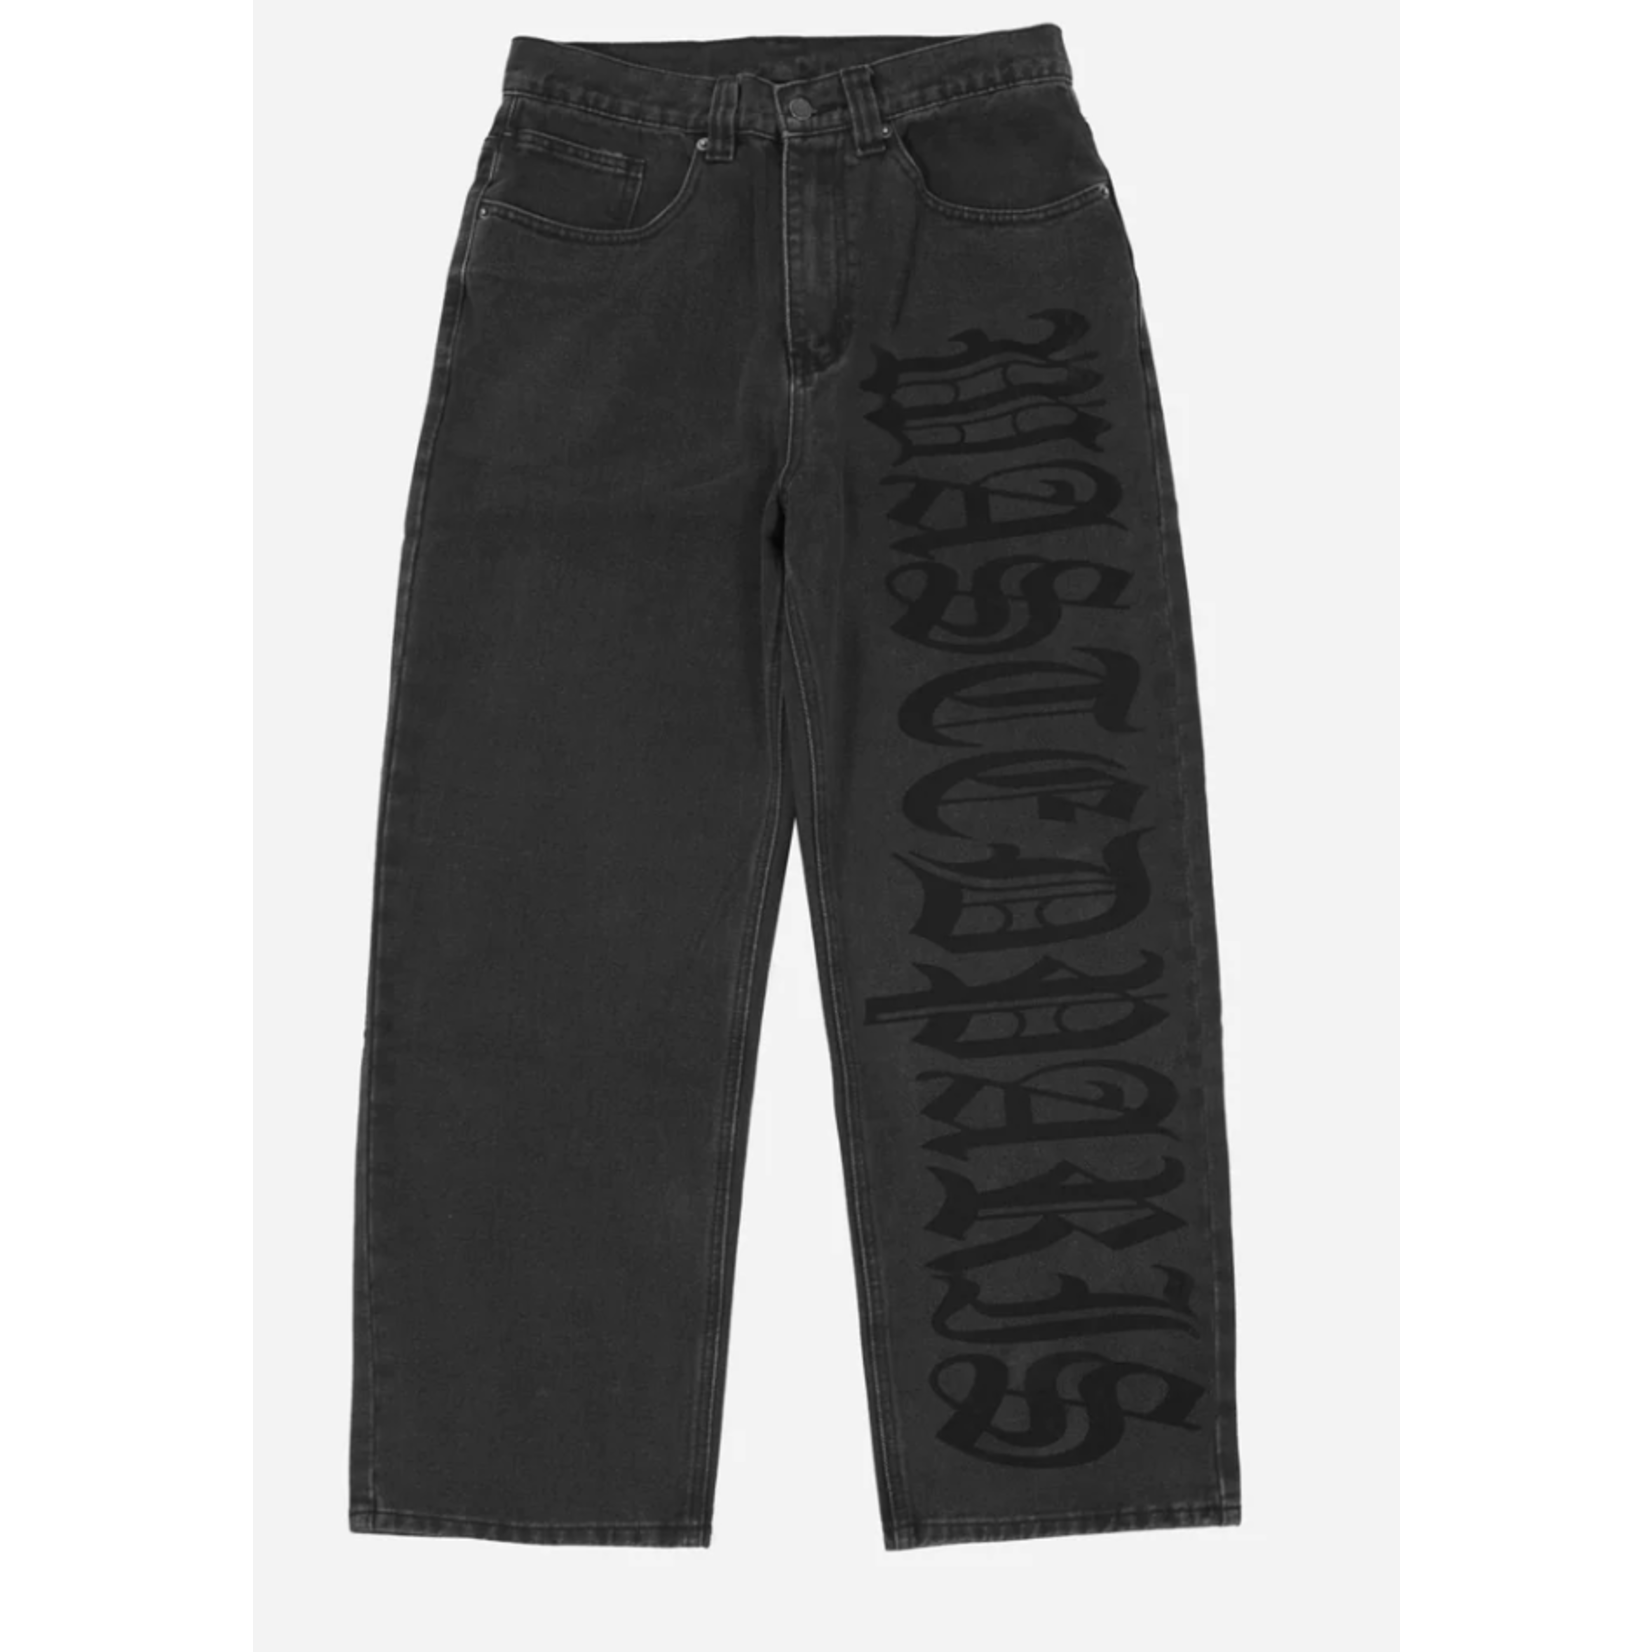 WASTED PARIS Wasted Paris Casper Pant Faithful - Faded Grey